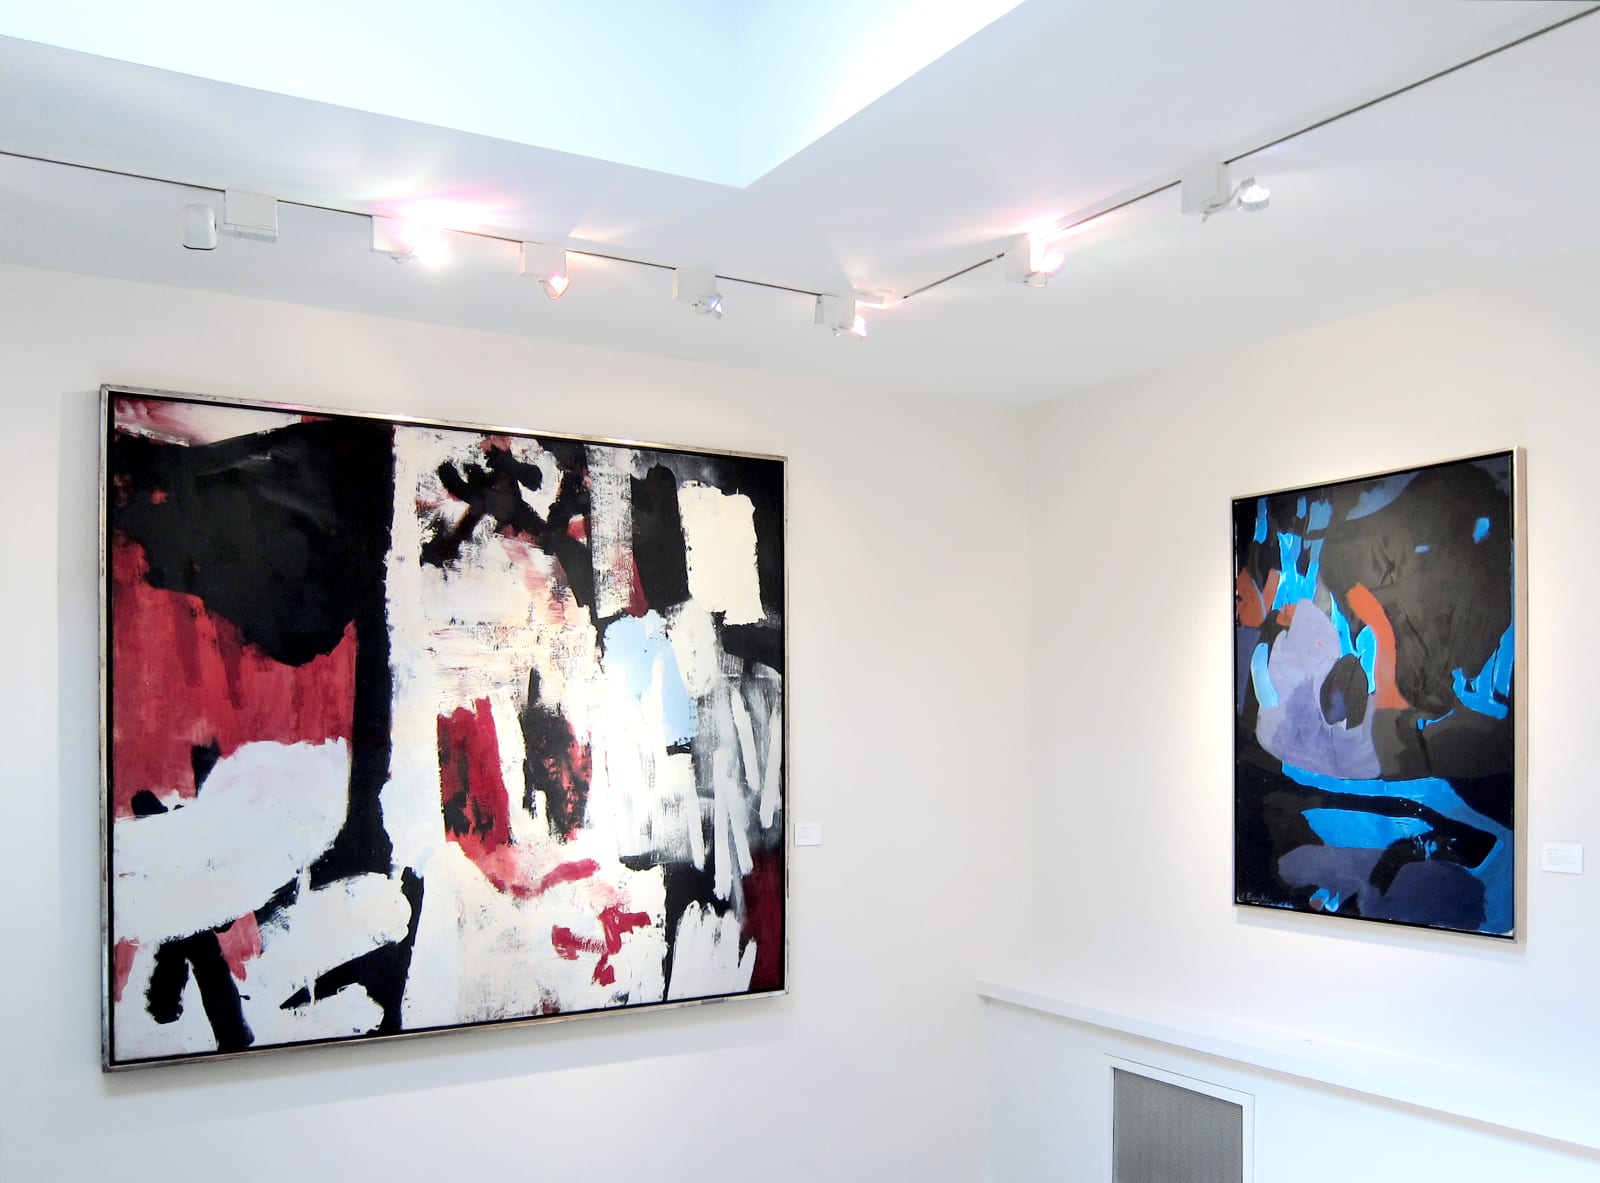 Installation view: Pulling at Polarities